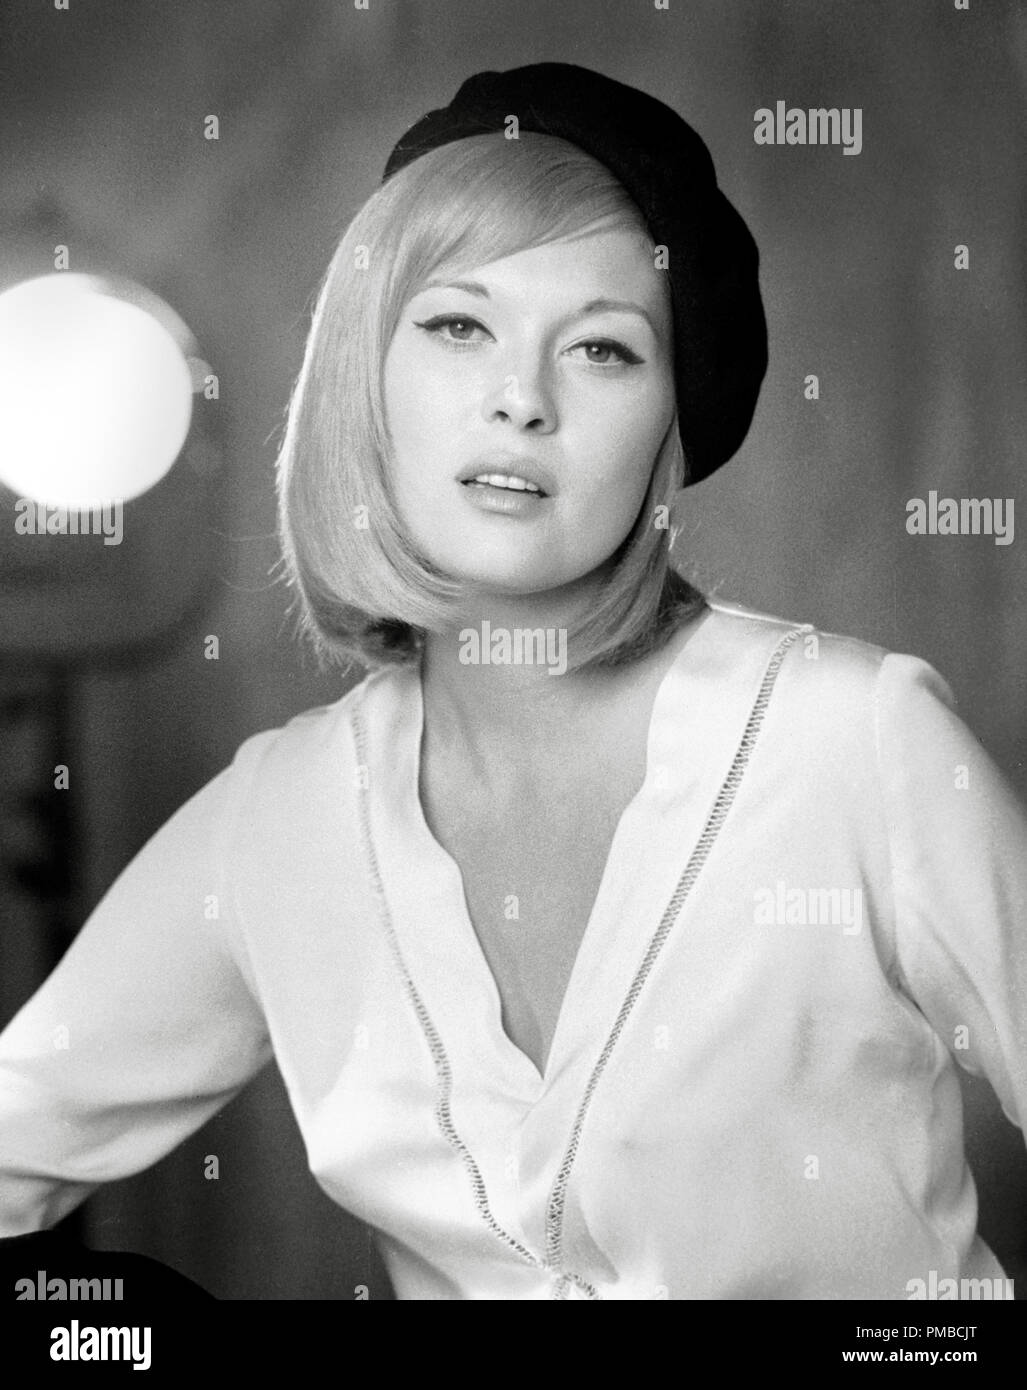 Faye Dunaway in a Studio Publicity Still from 